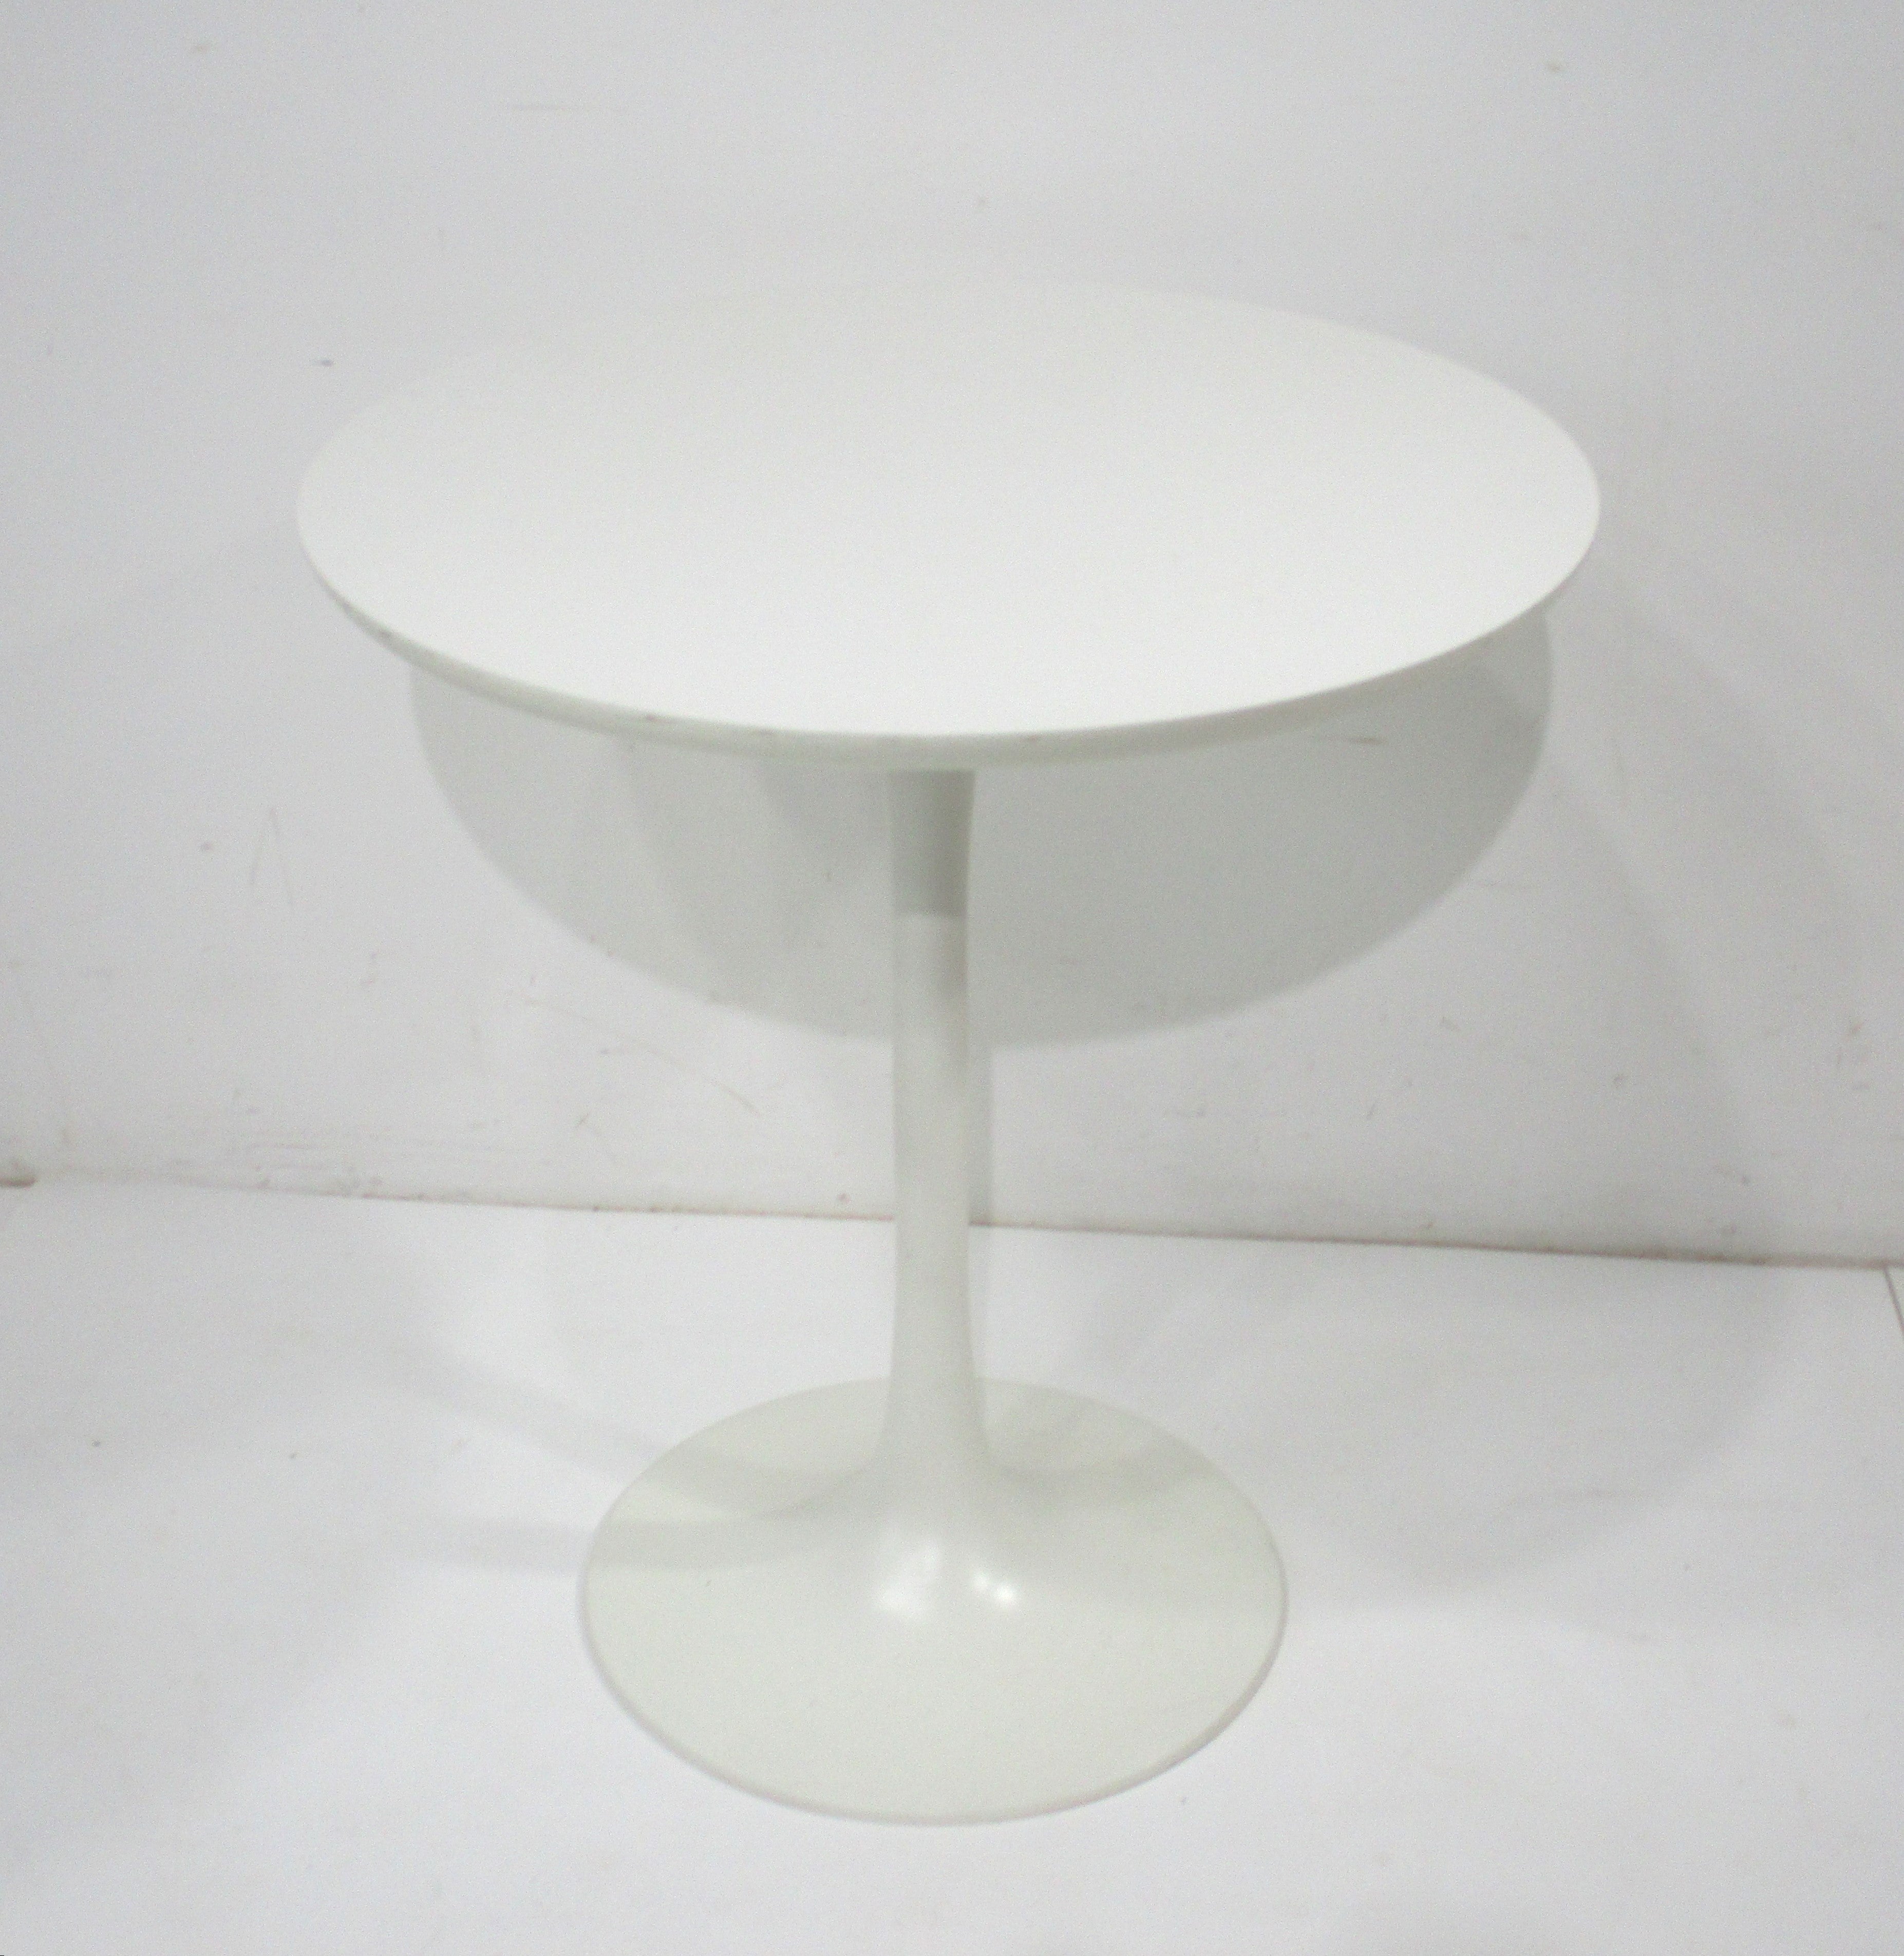 A taller round tulip side table or lamp table in white with matching Laminate top designed by Maurice Burke in the manner of Eero Saarinen and Knoll . Manufactured by the Burke furniture company making this style in larger , taller or bigger sizes